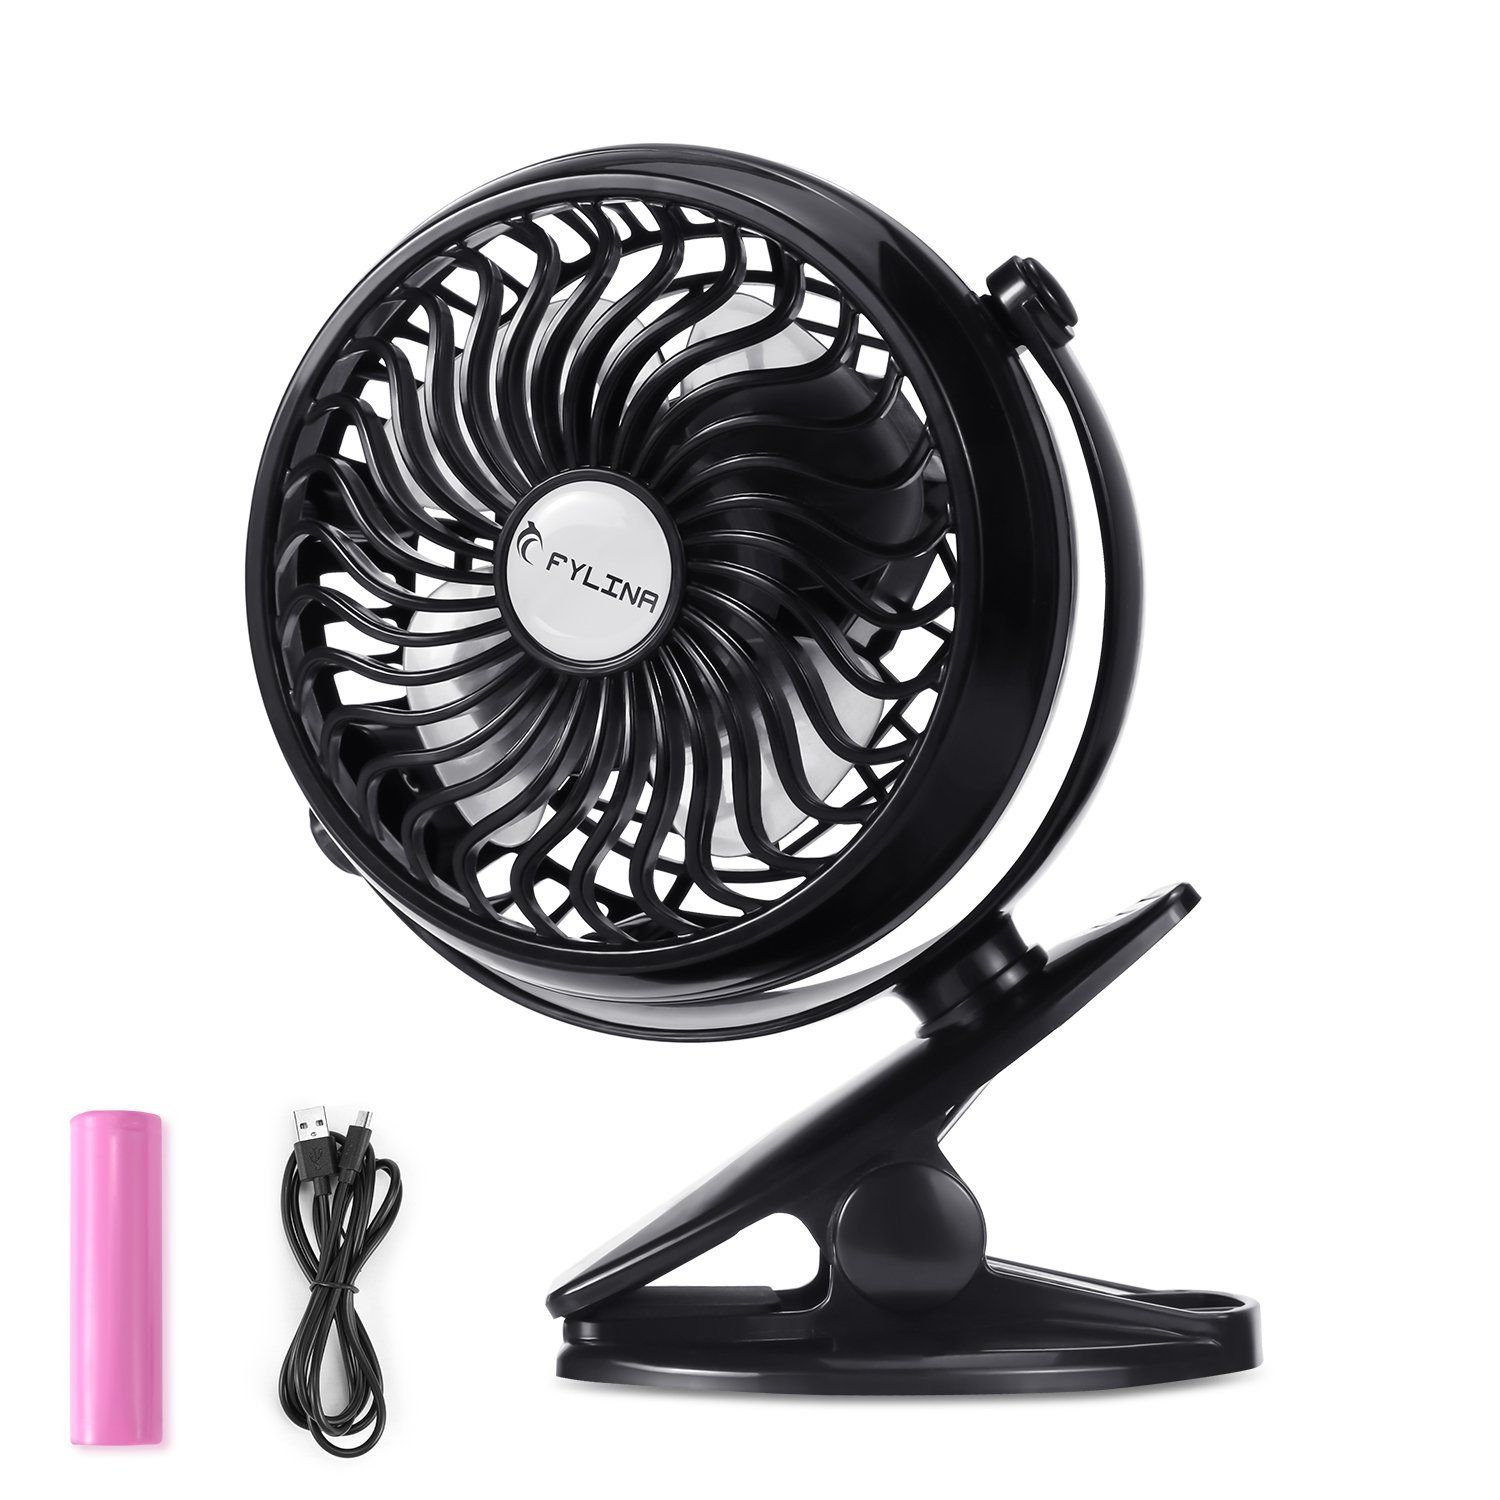 FLYING Mini USB Desk Rechargeable Fan with Upgraded 2600mAh Enhanced Airflow,Lower Noise,Personal Cooling - Black